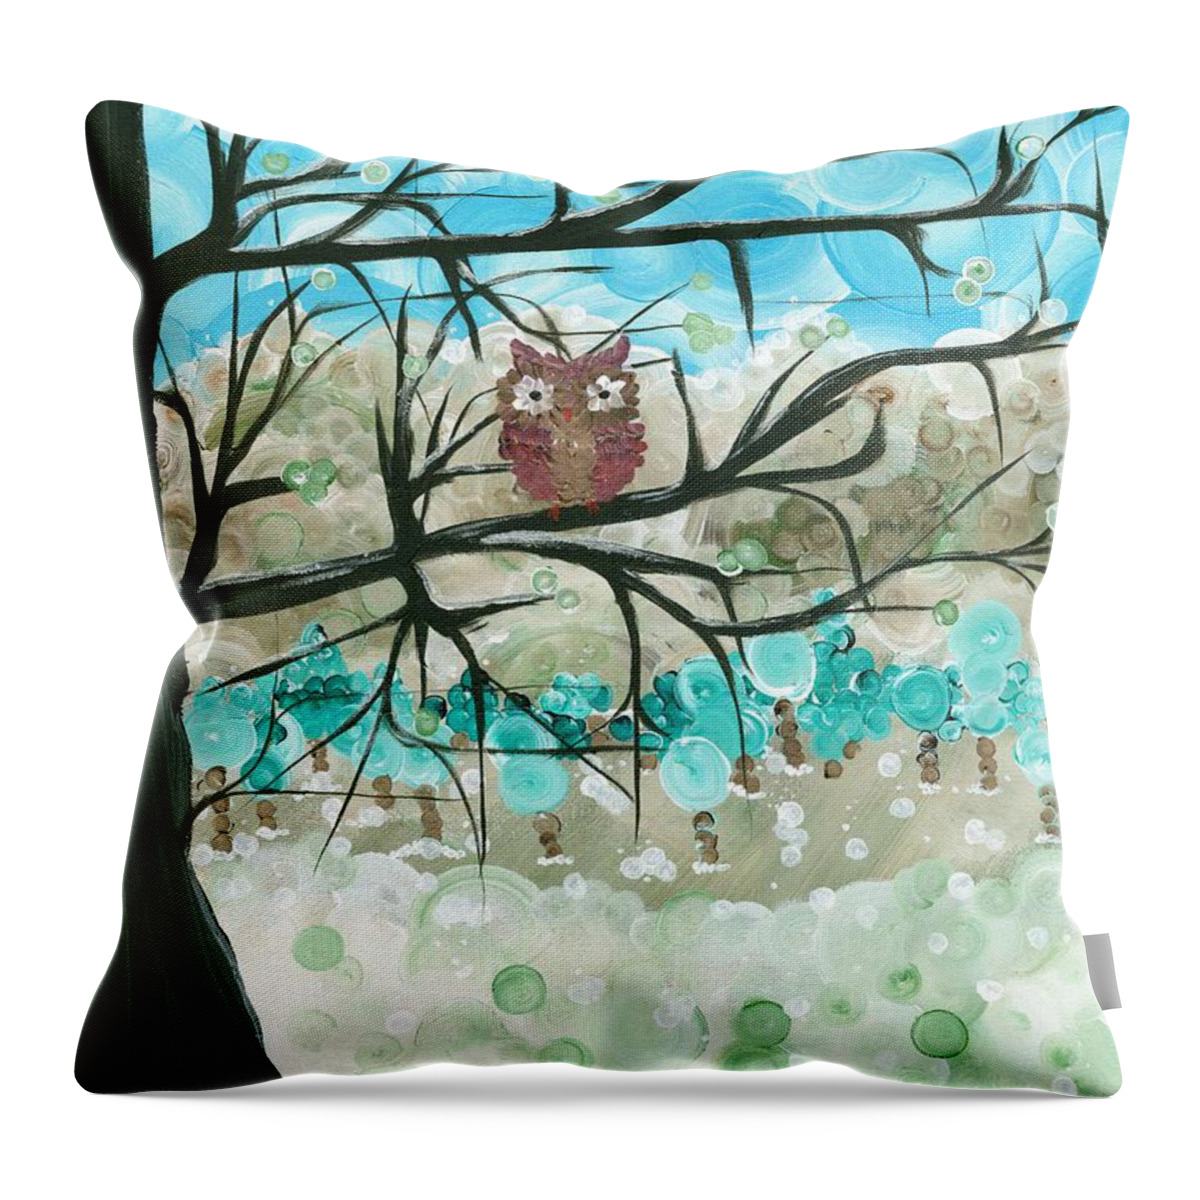 Owls Throw Pillow featuring the painting Hoolandia Seasons - Winter by MiMi Stirn